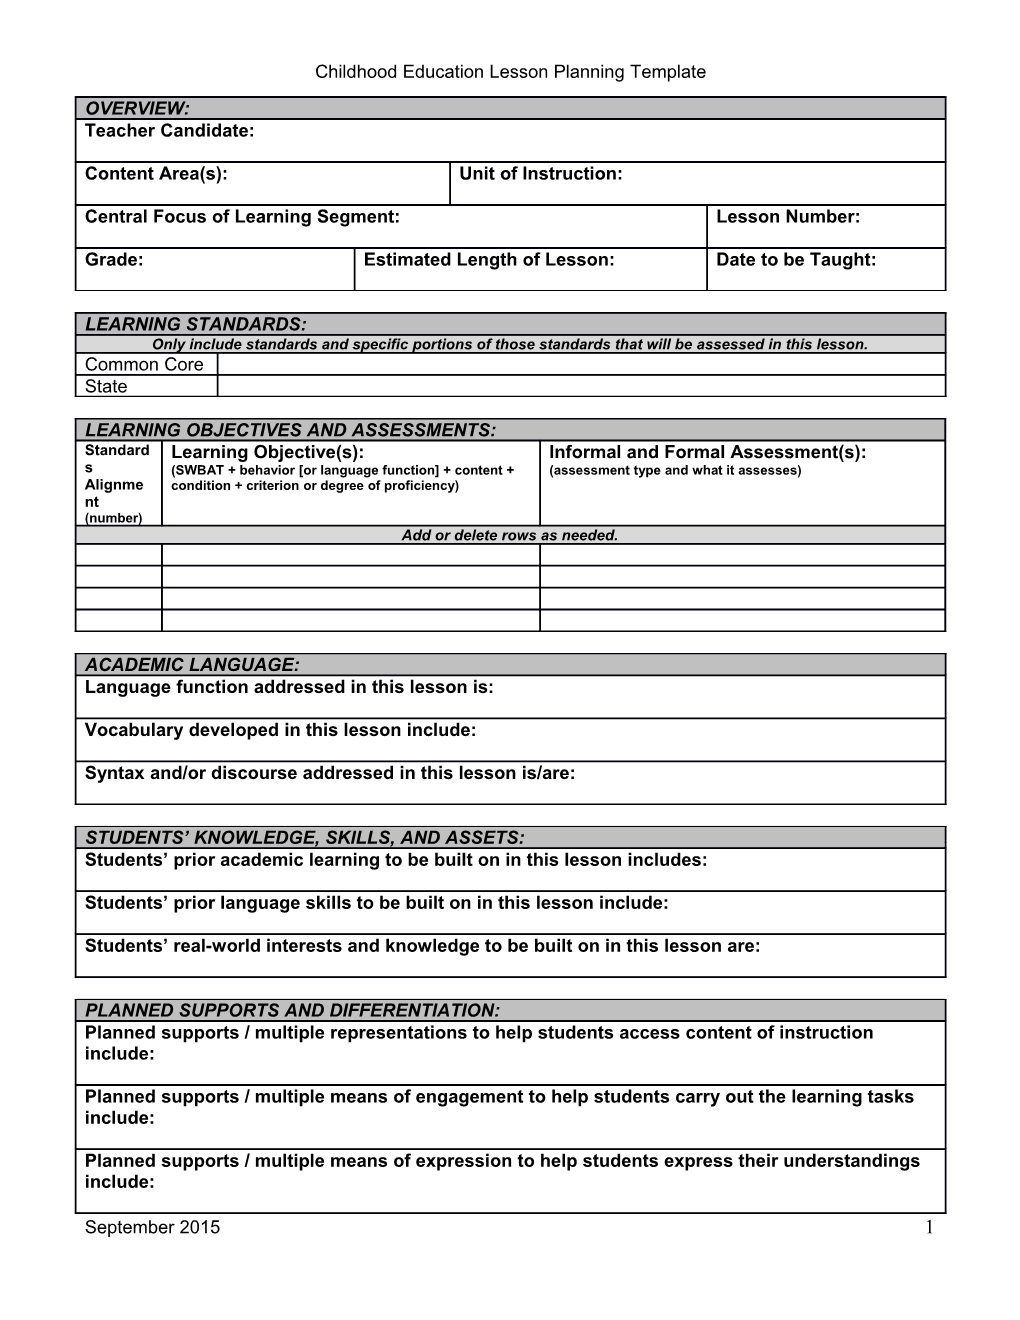 Childhood Education Lesson Planning Template